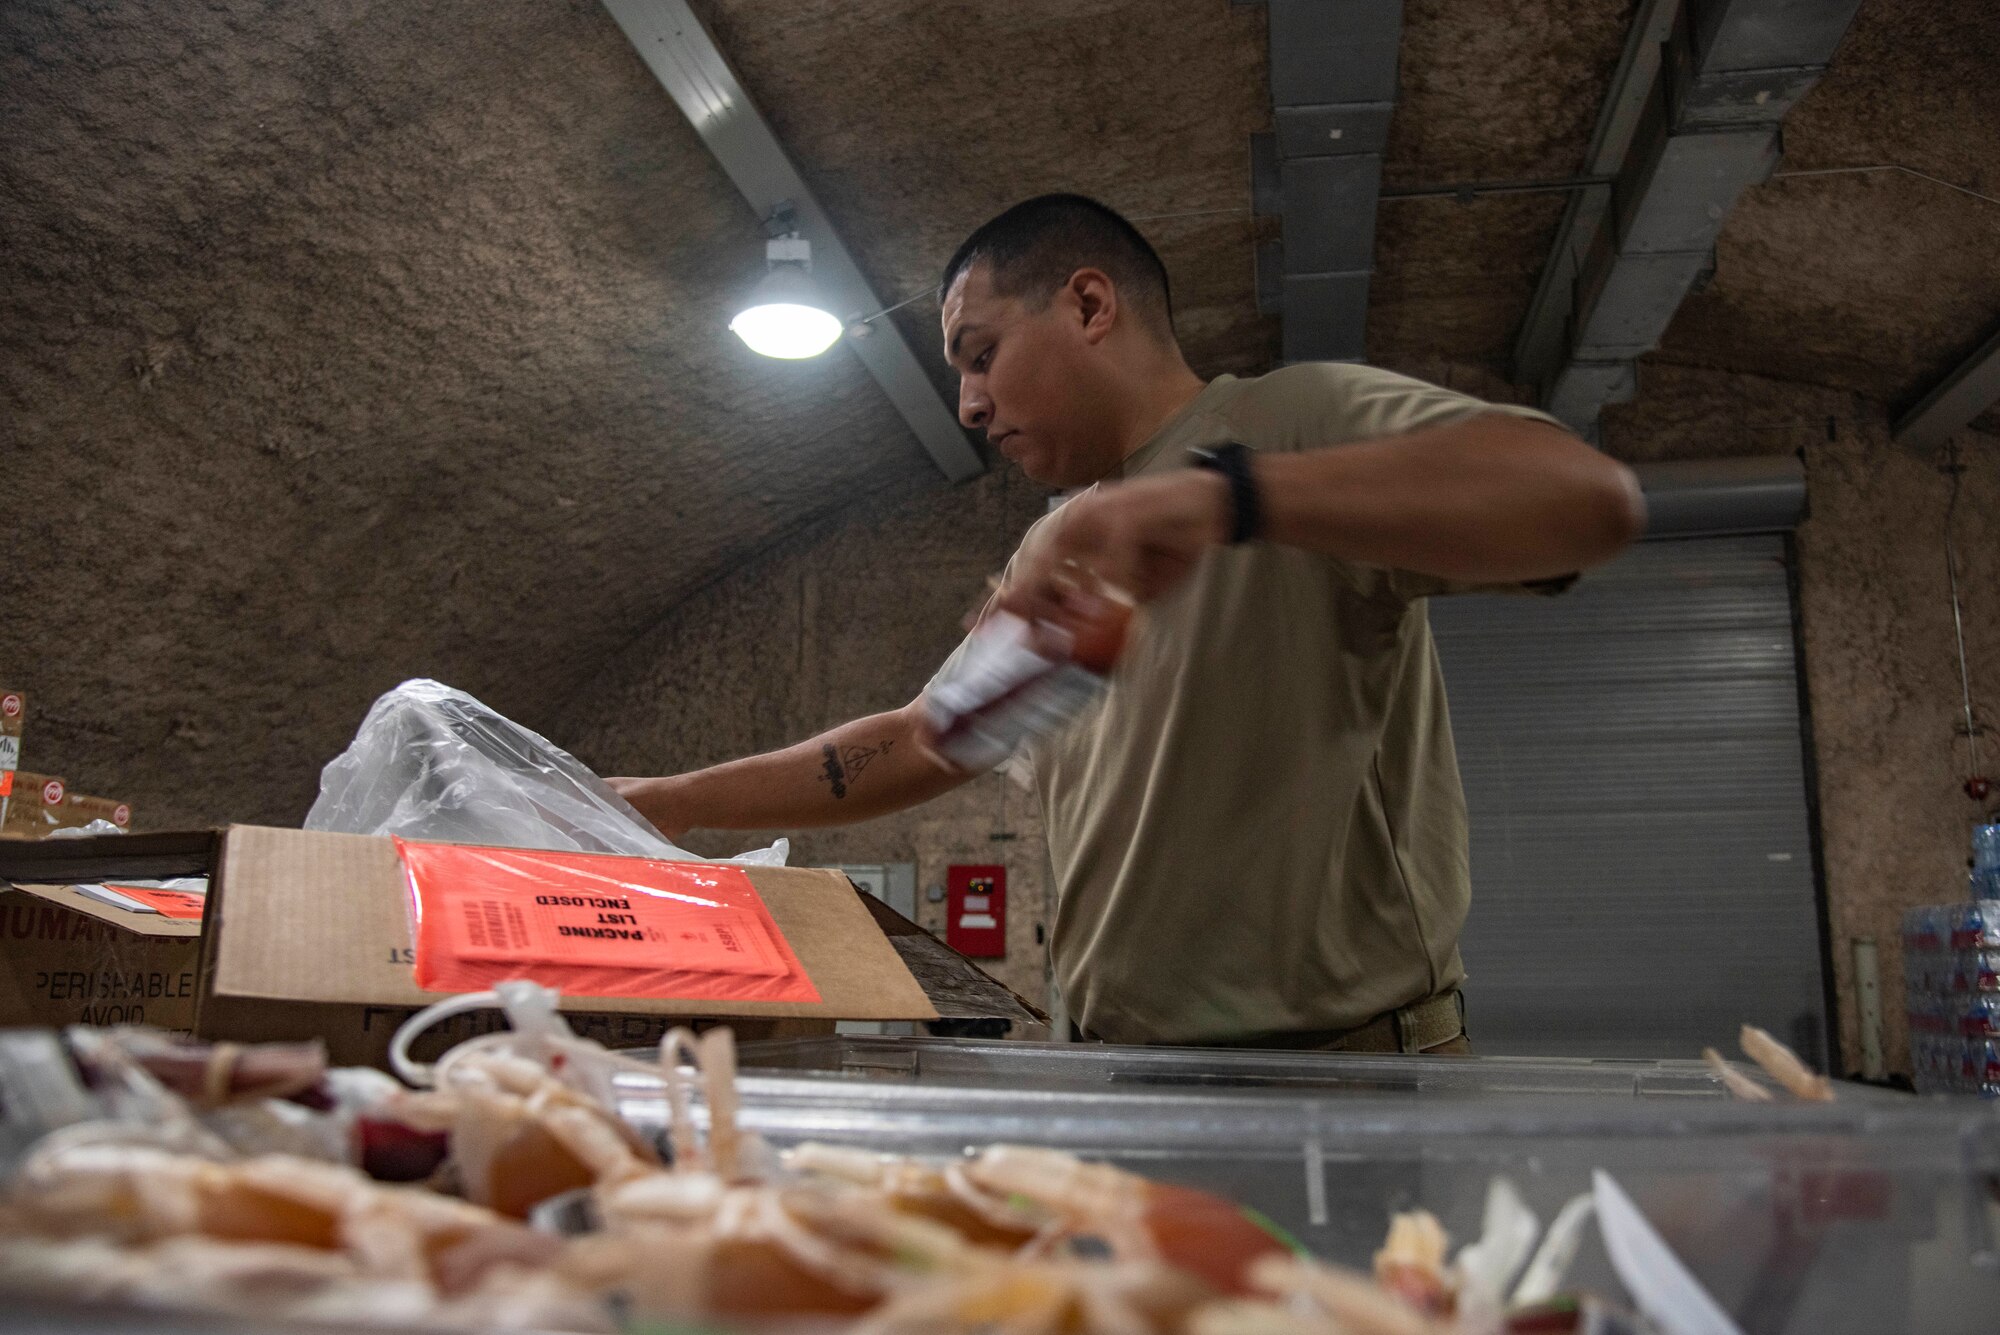 Tech. Sgt. Miguel Davila, 379th Expeditionary Medical Support Squadron medical logistics technician, packs blood products July 1, 2021, at Al Udeid Air Base, Qatar.